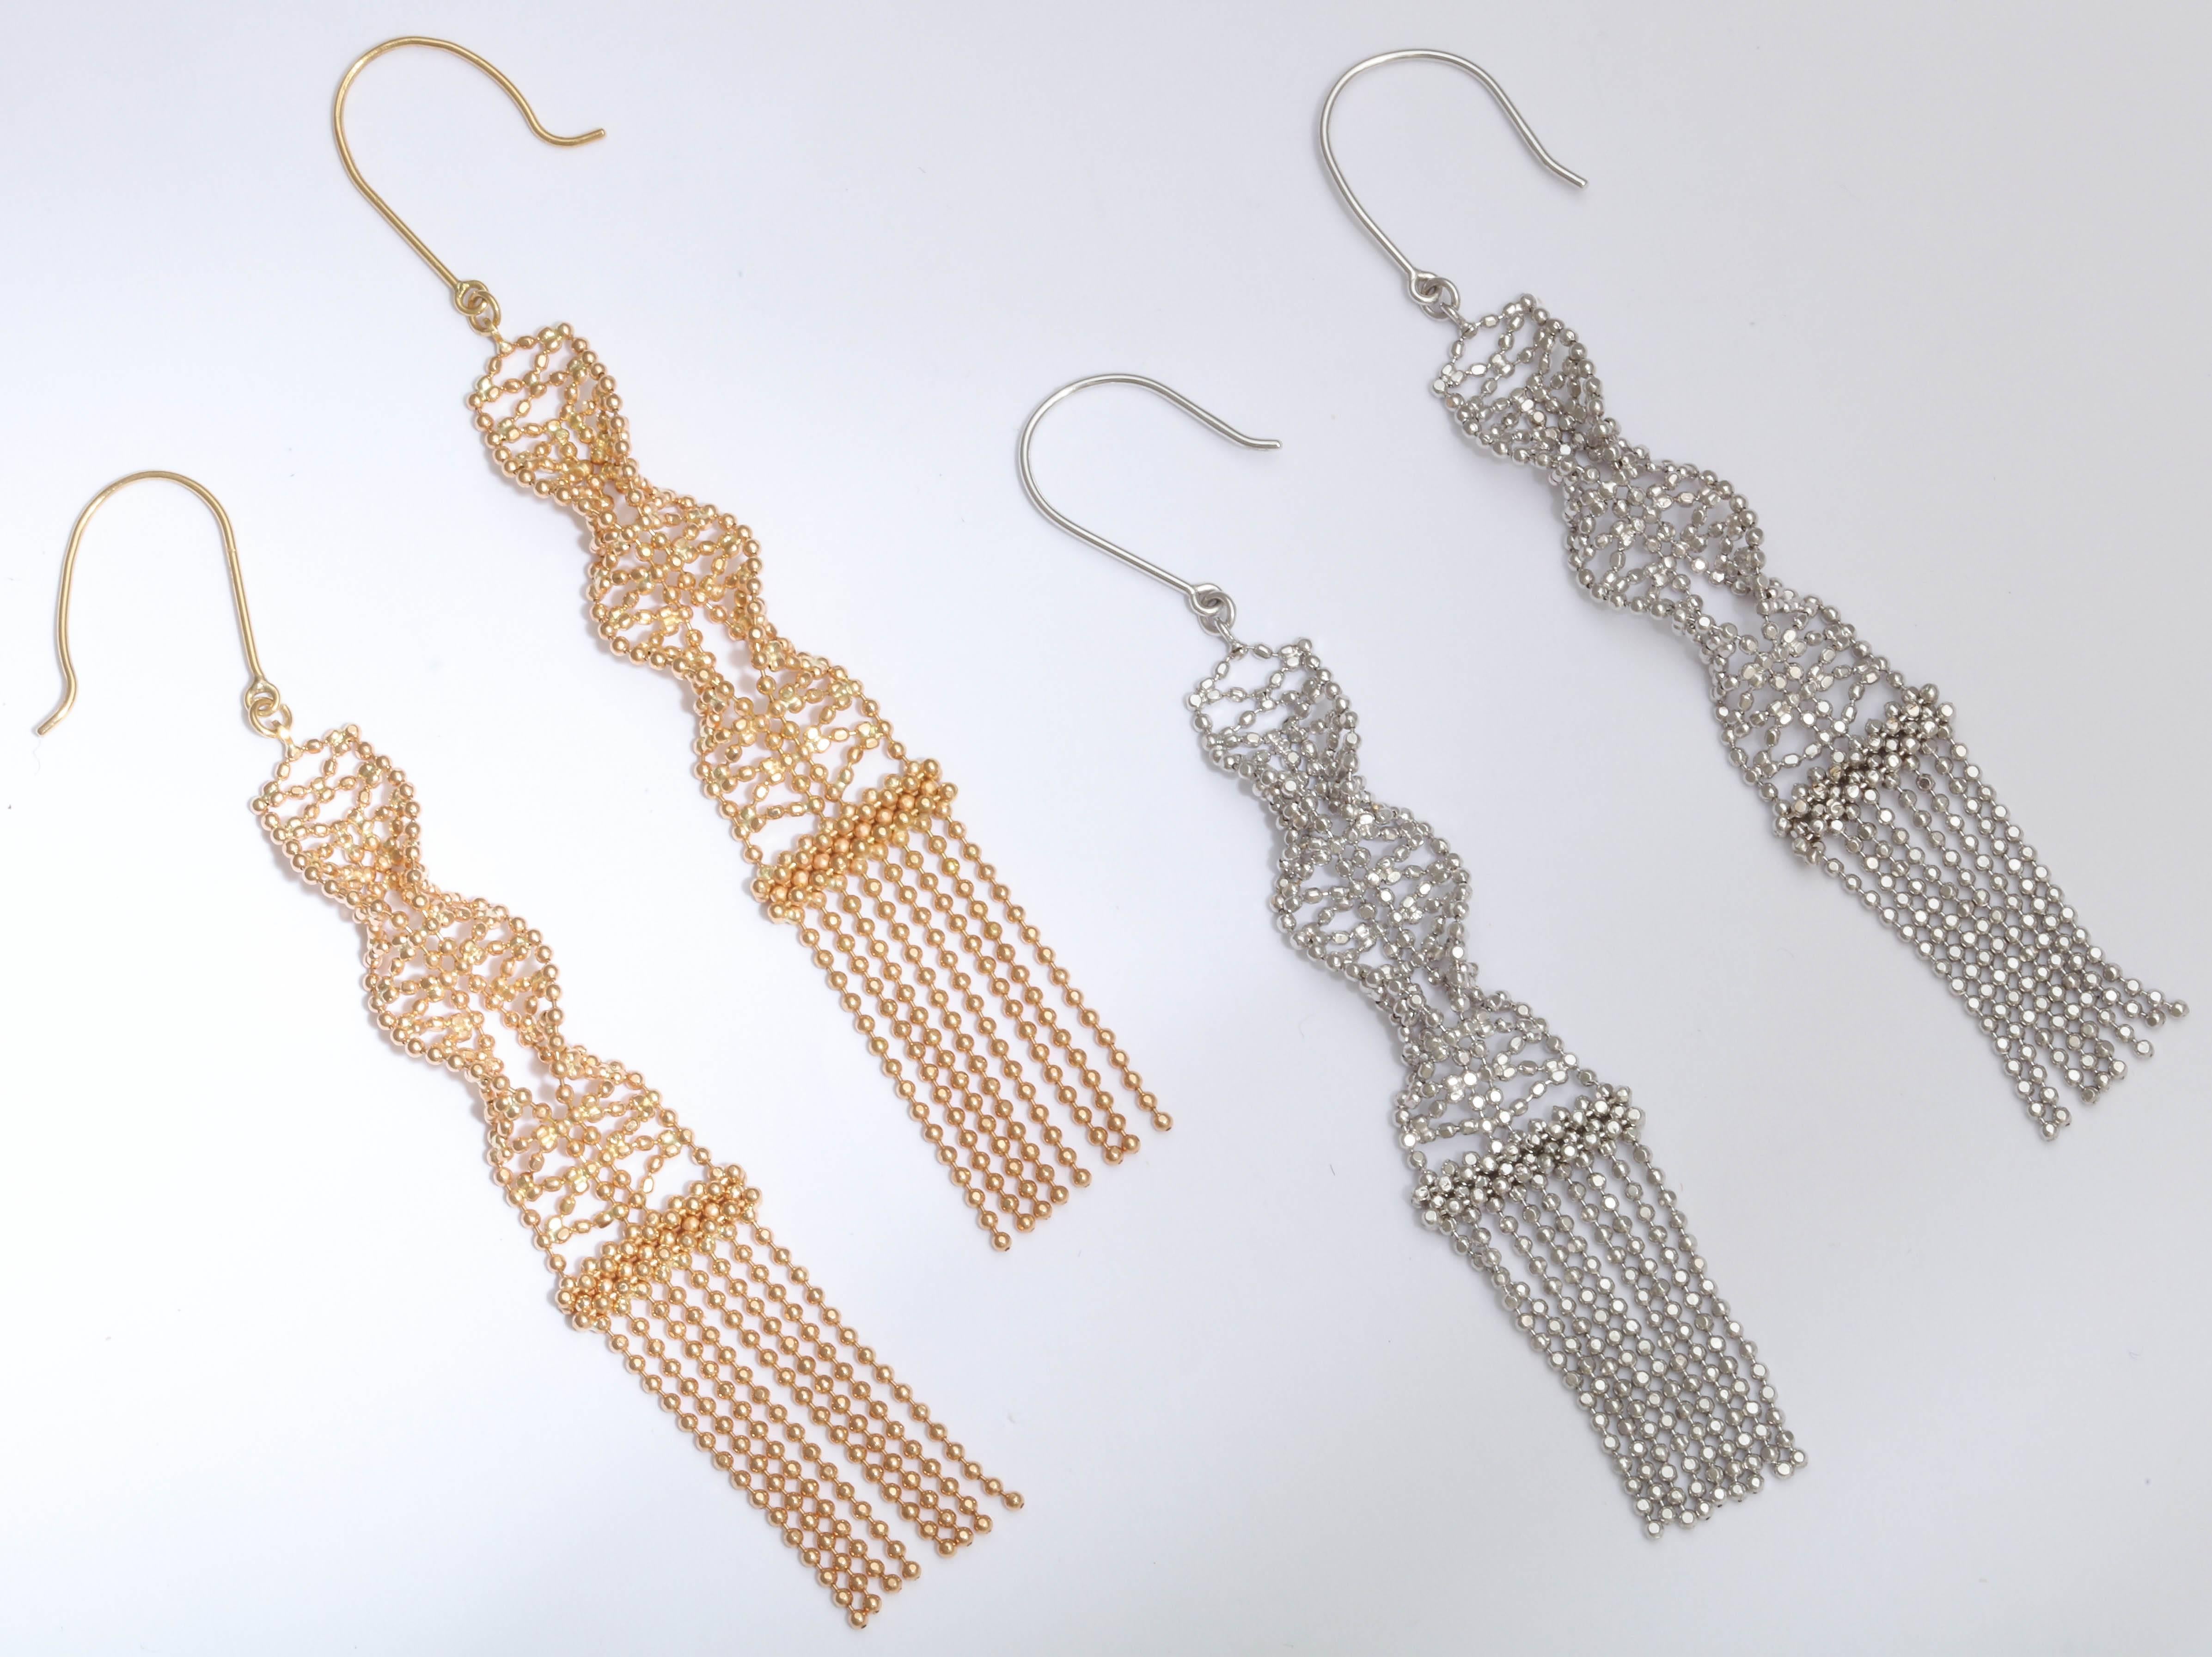 These earrings are made from fine faceted ball chain intertwined to make 2 rows of spirals. They drape beautifully from the ear and their movement makes them even sparkle more.  Available in 14 kt white gold, rose gold or yellow gold.